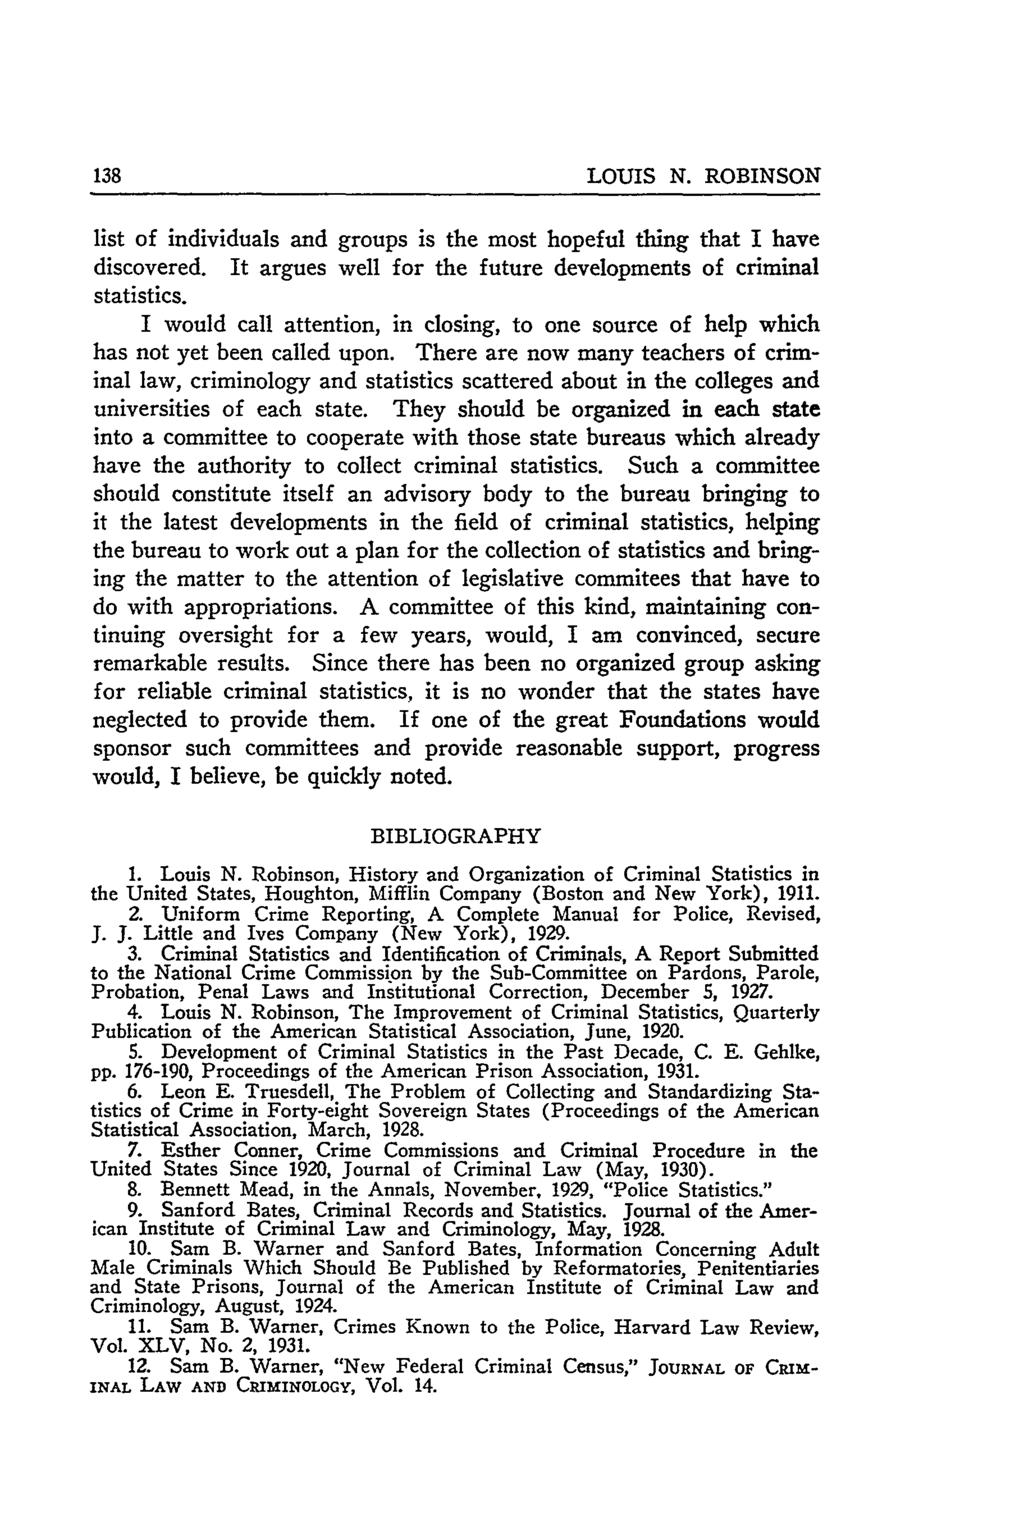 LOUIS N. ROBINSON list of individuals and groups is the most hopeful thing that I have discovered. It argues well for the future developments of criminal statistics.